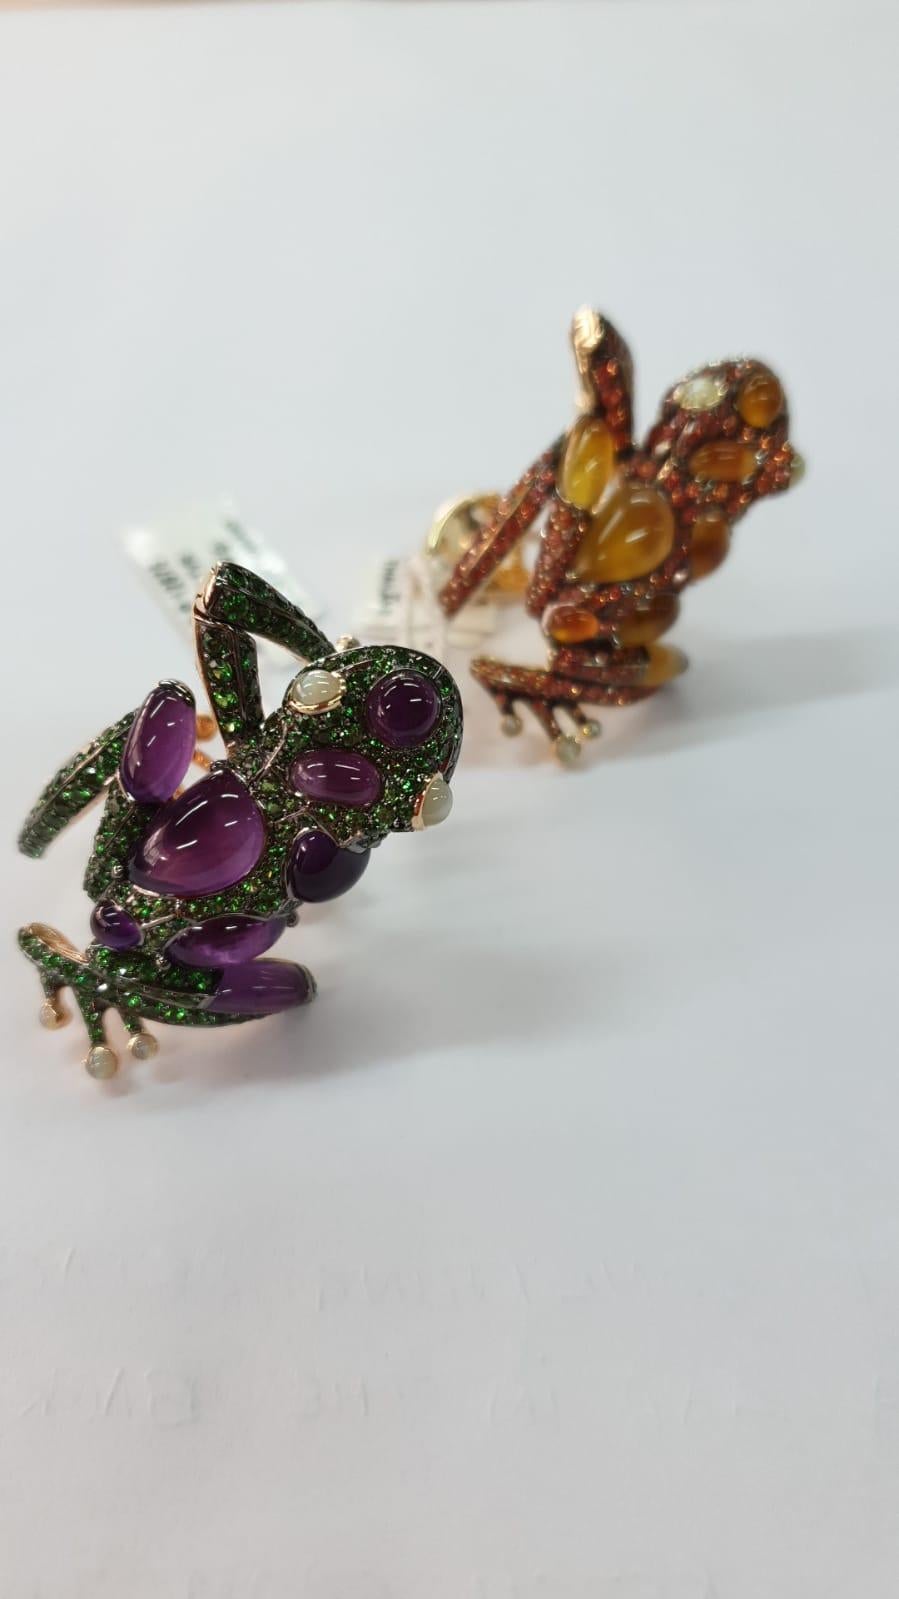 Also Available in purple amethyst and green tsavorite 

When it comes to jewellery, frogs are most definitely lucky charms. The frog is a Native American symbol of wealth and prosperity. ... Owning and wearing an item of frog jewellery opens your